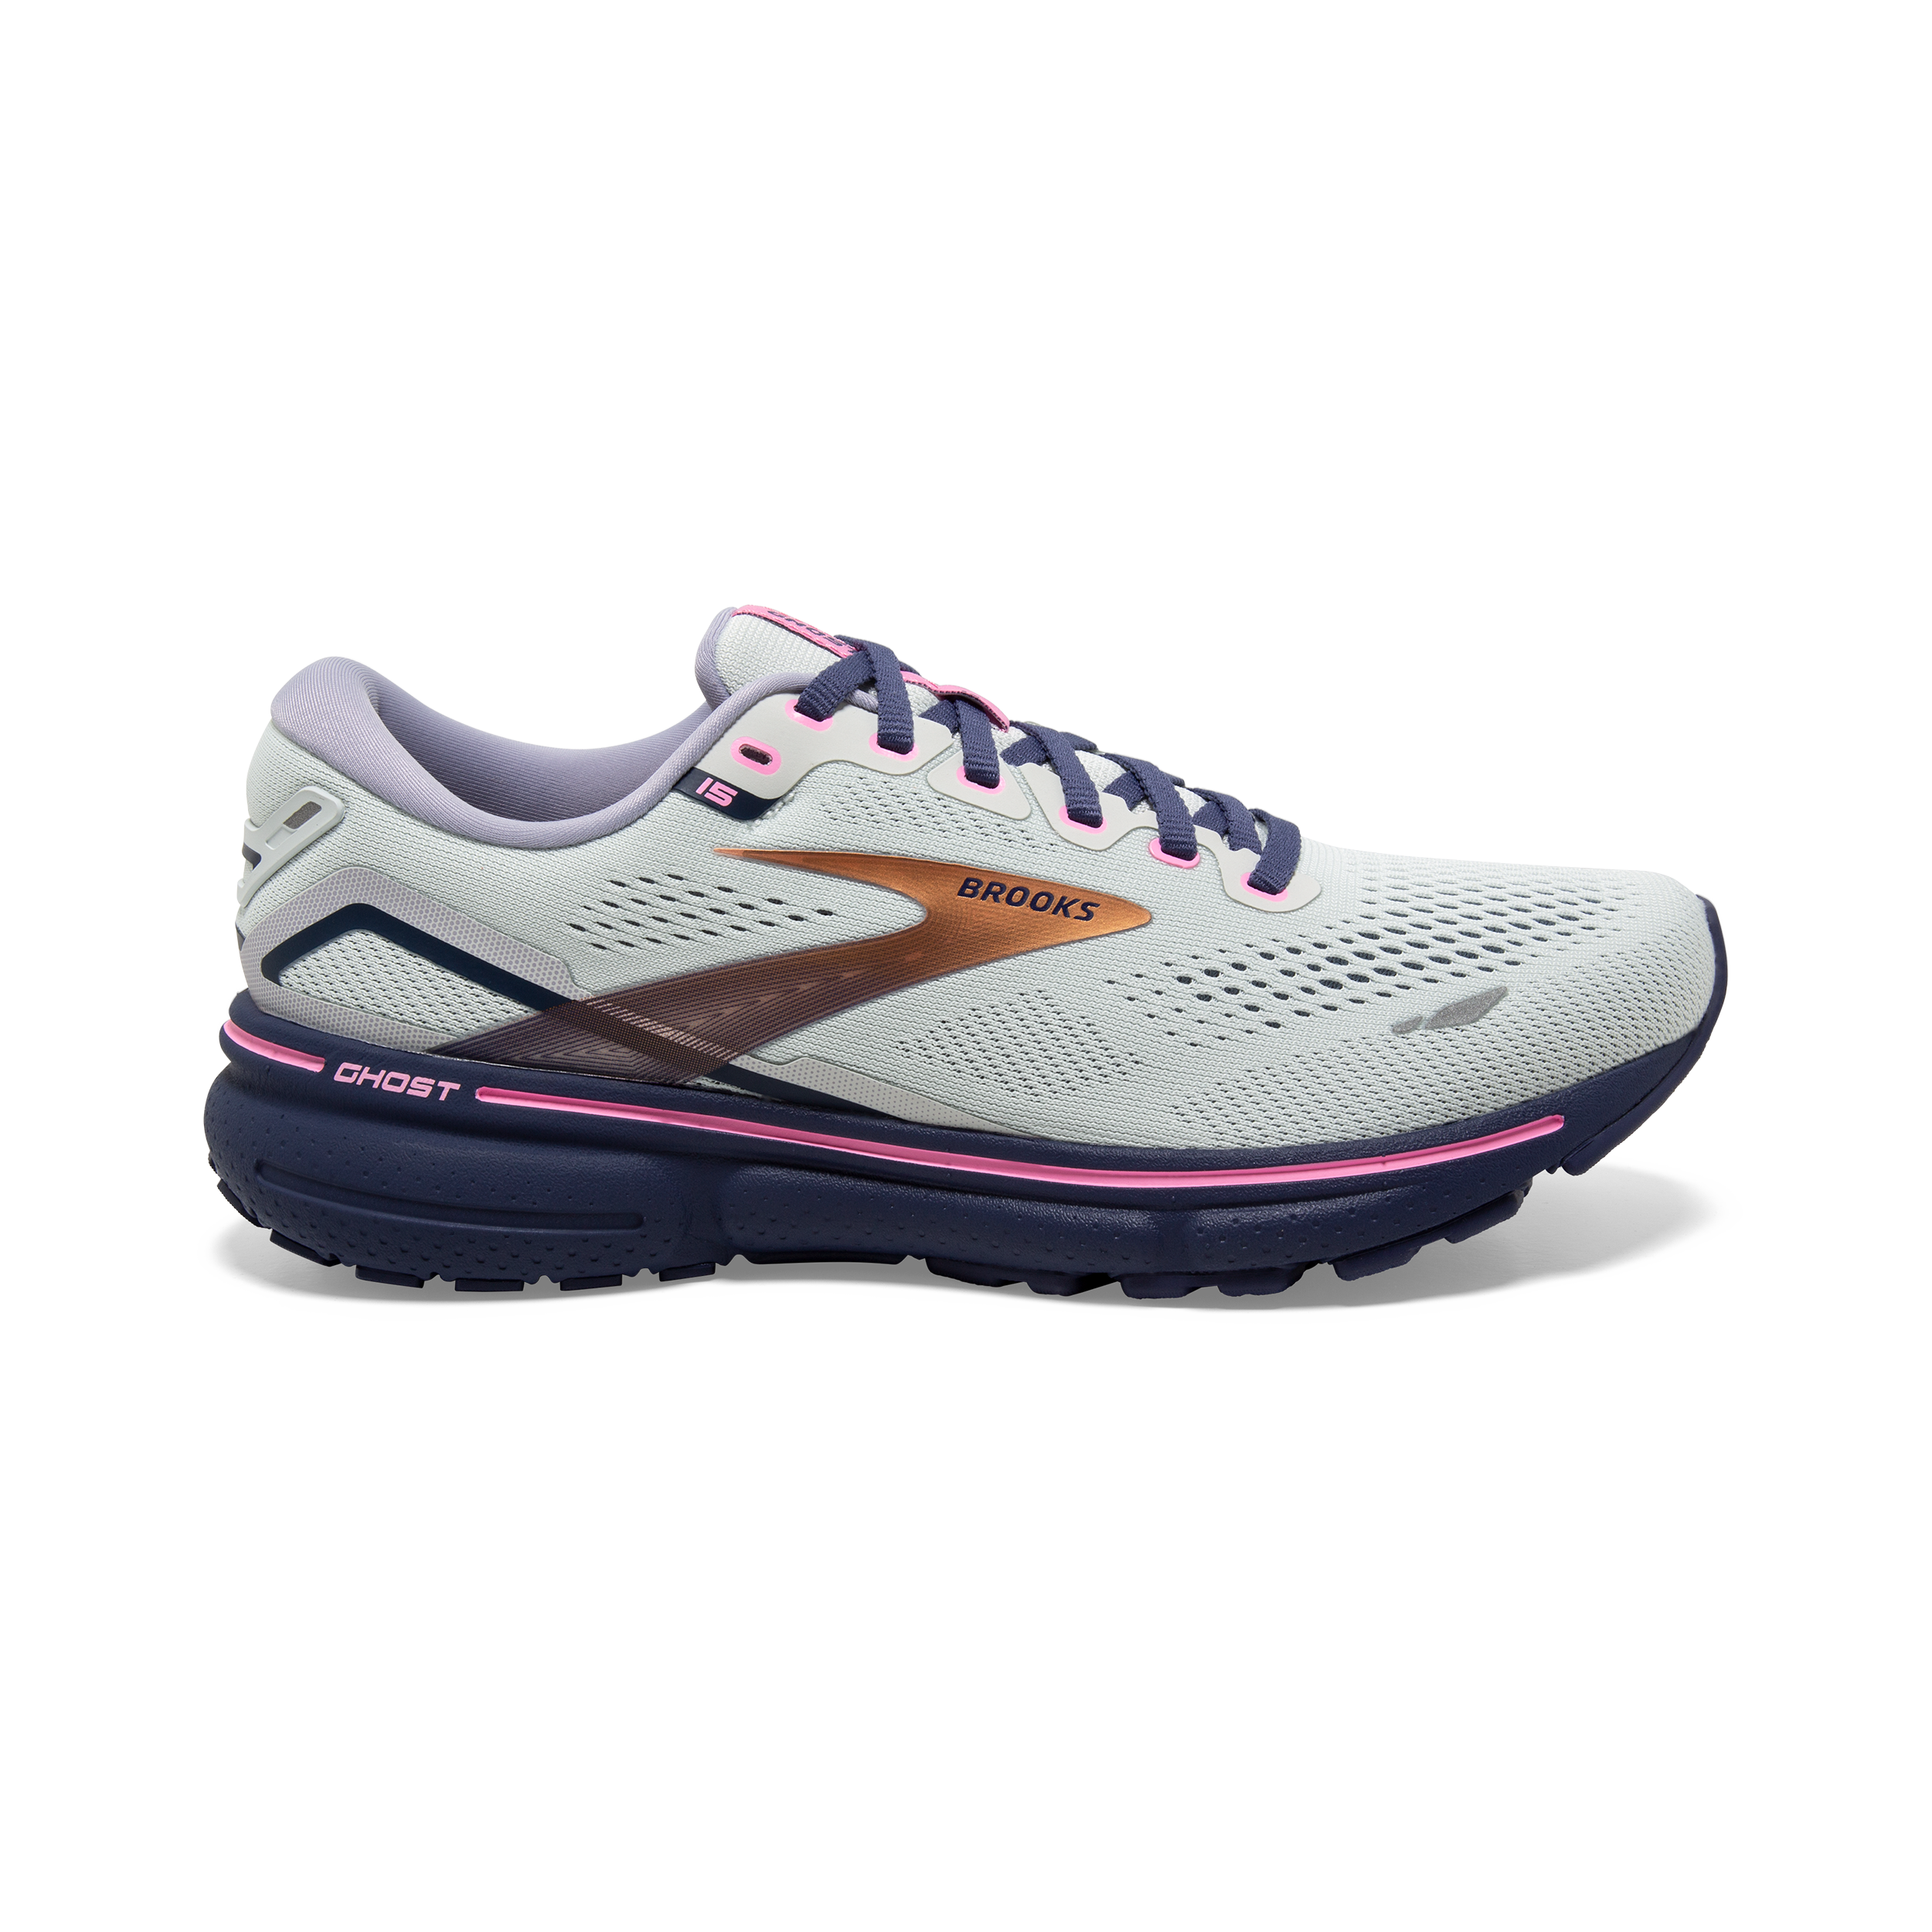 Misuse Whose spur Ghost 15 Women's Cushioned Road Running Shoes